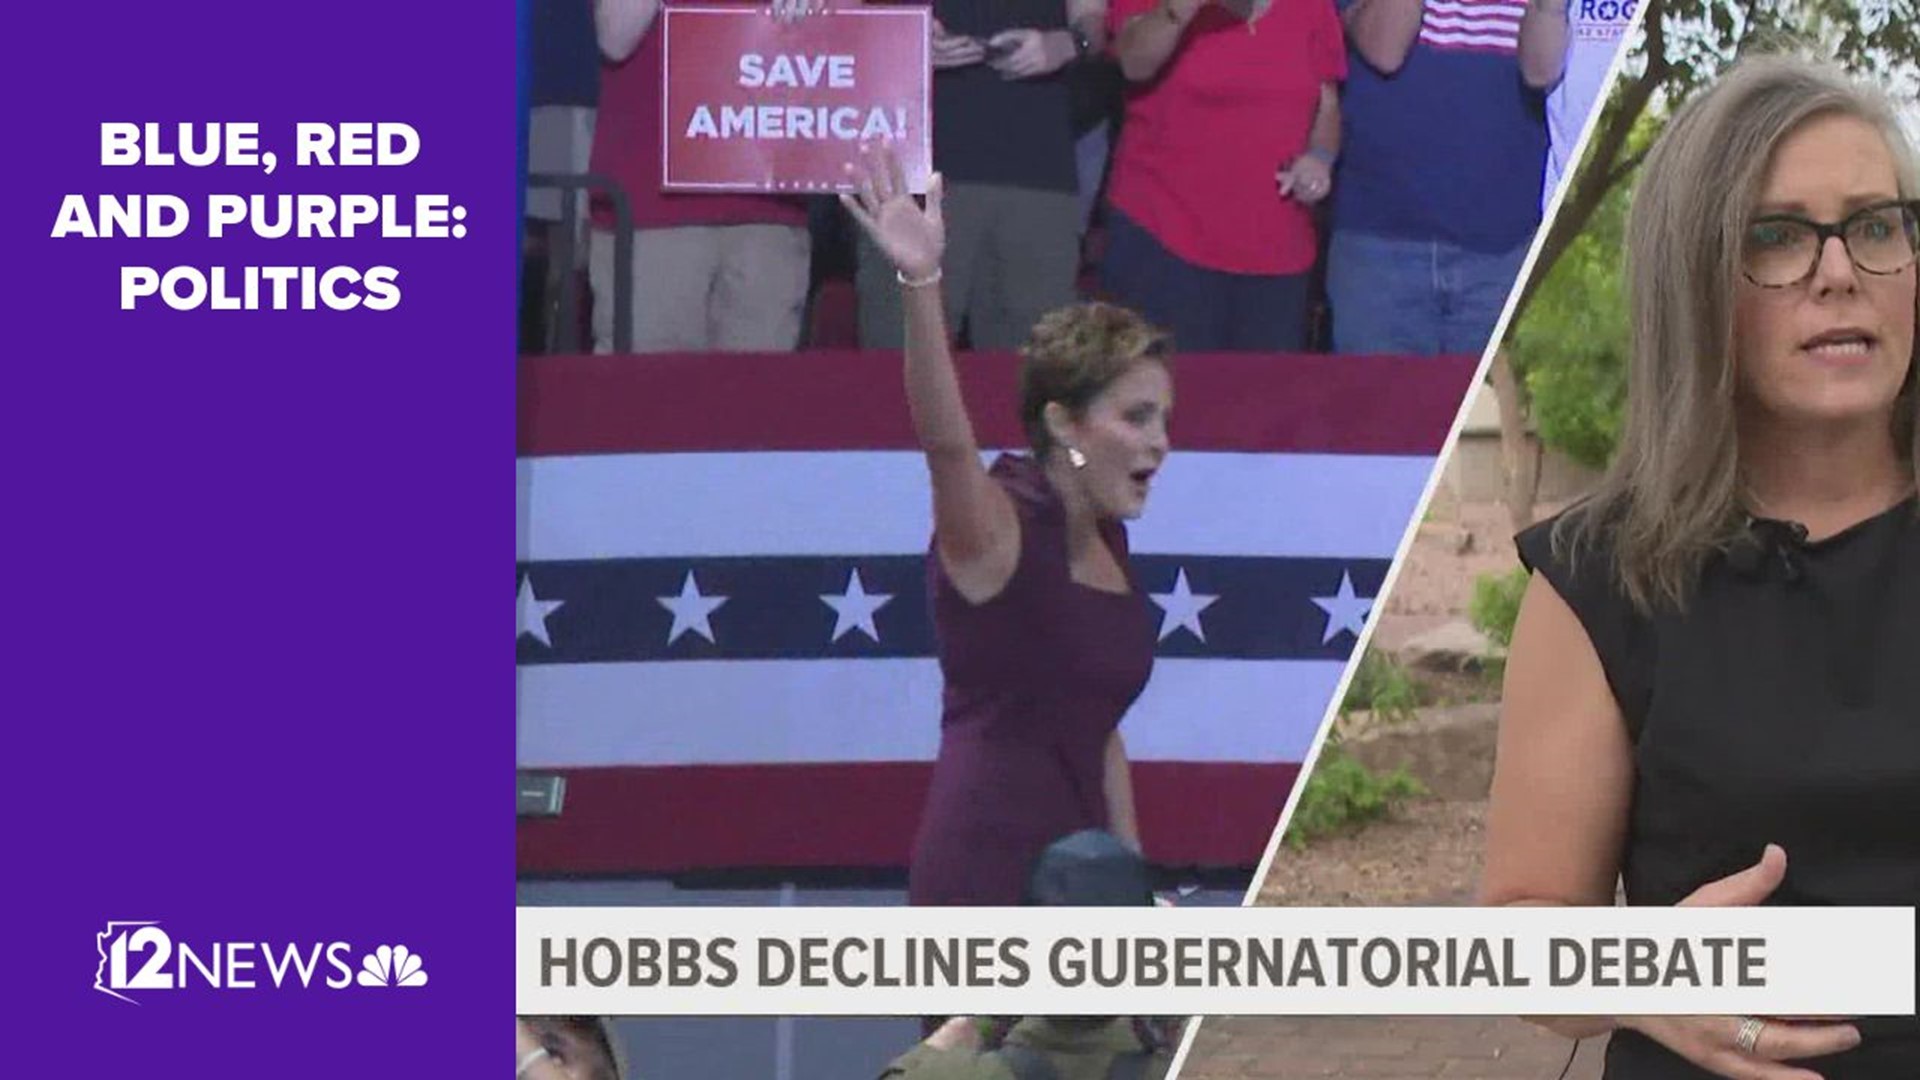 Democrat Katie Hobbs’ campaign for Arizona governor has ended negotiations with the state commission overseeing candidate debates to come to an agreement that would